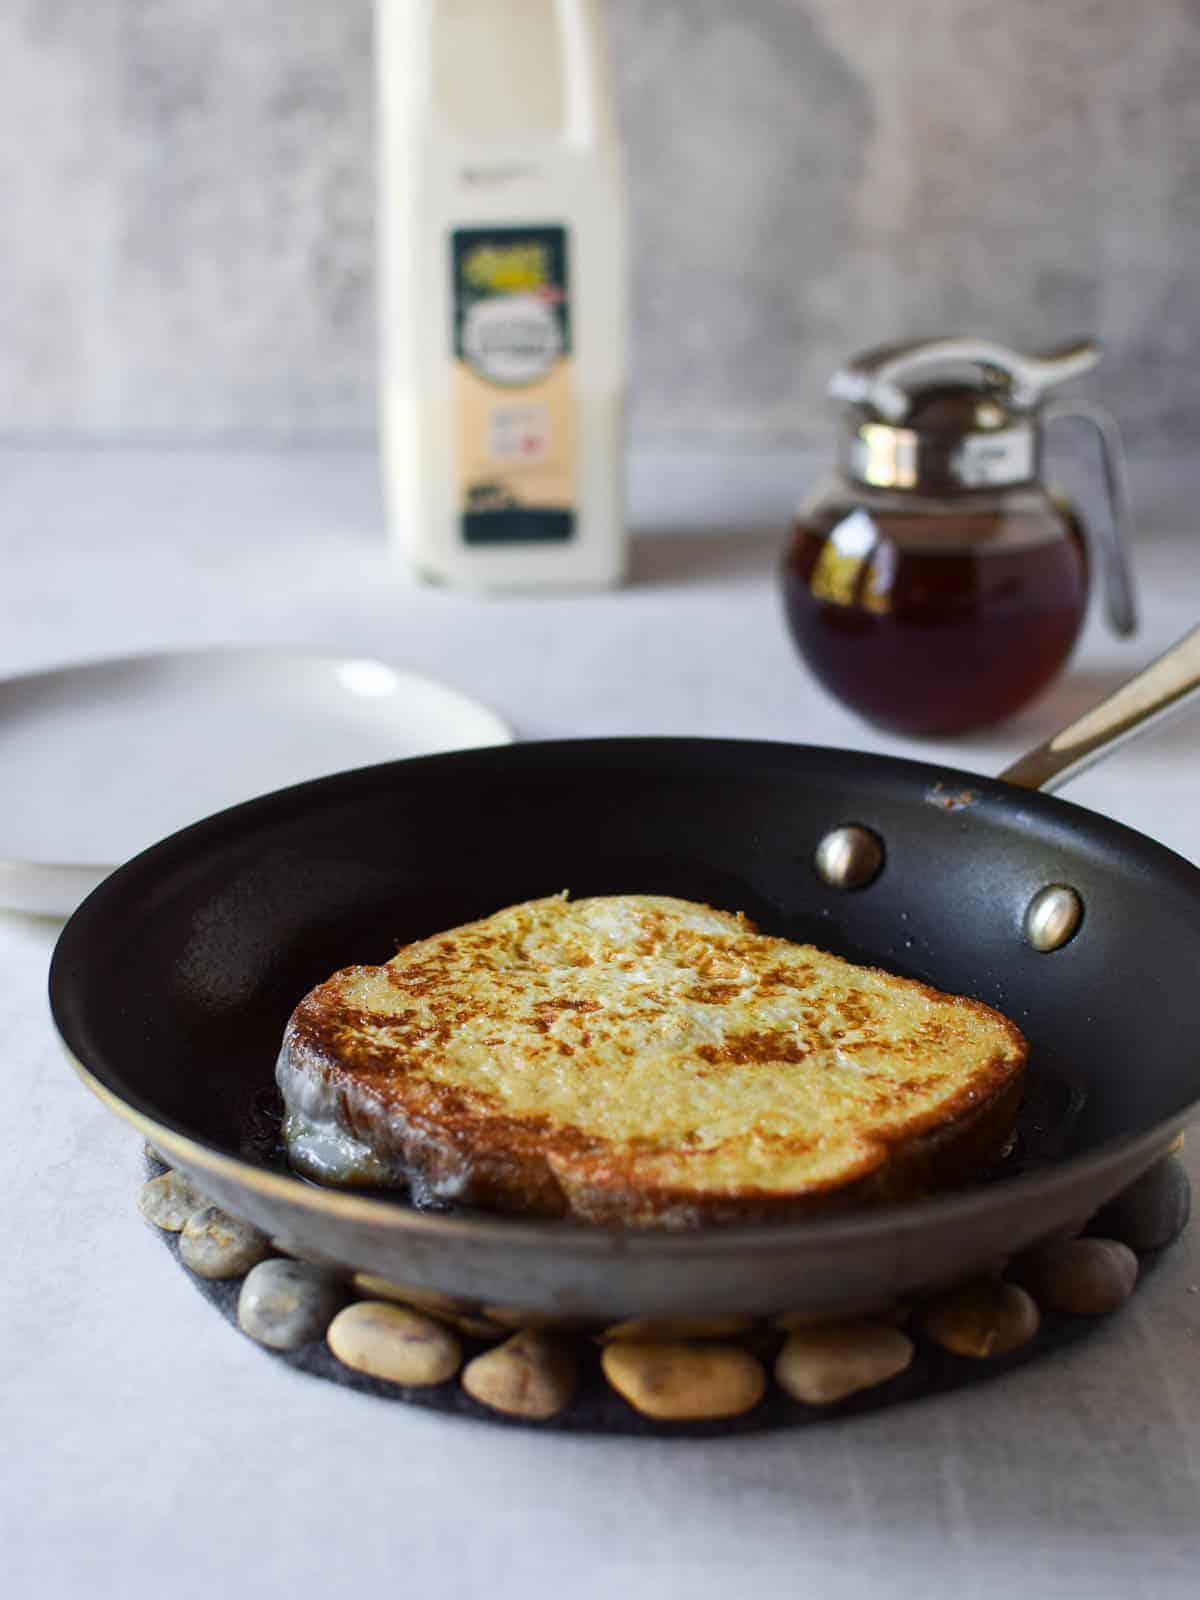 Golden brown cooked French toast in a frying pan.